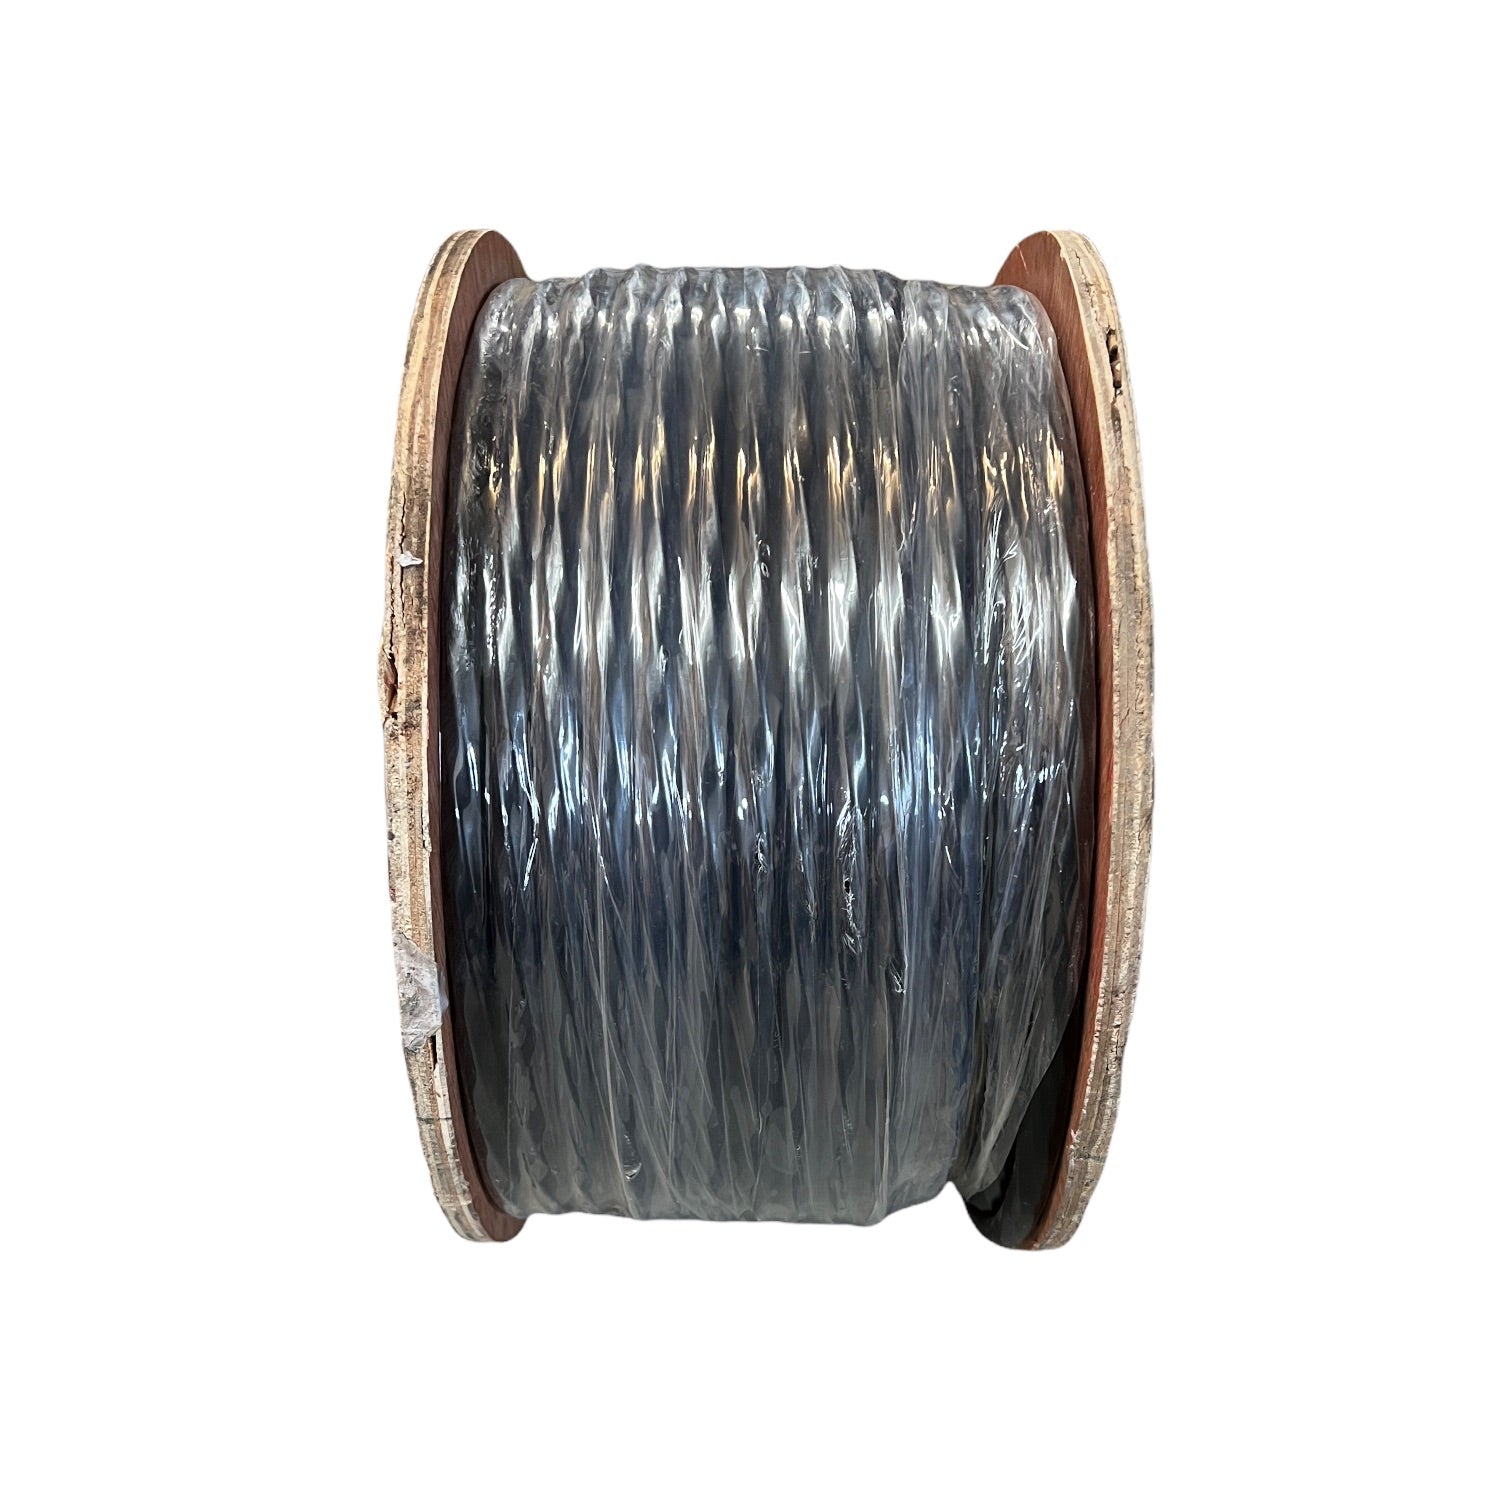 18/3X250 - Multi-Conductor Irrigation Control Wire, 18 awg, 18/3 X 250 ft